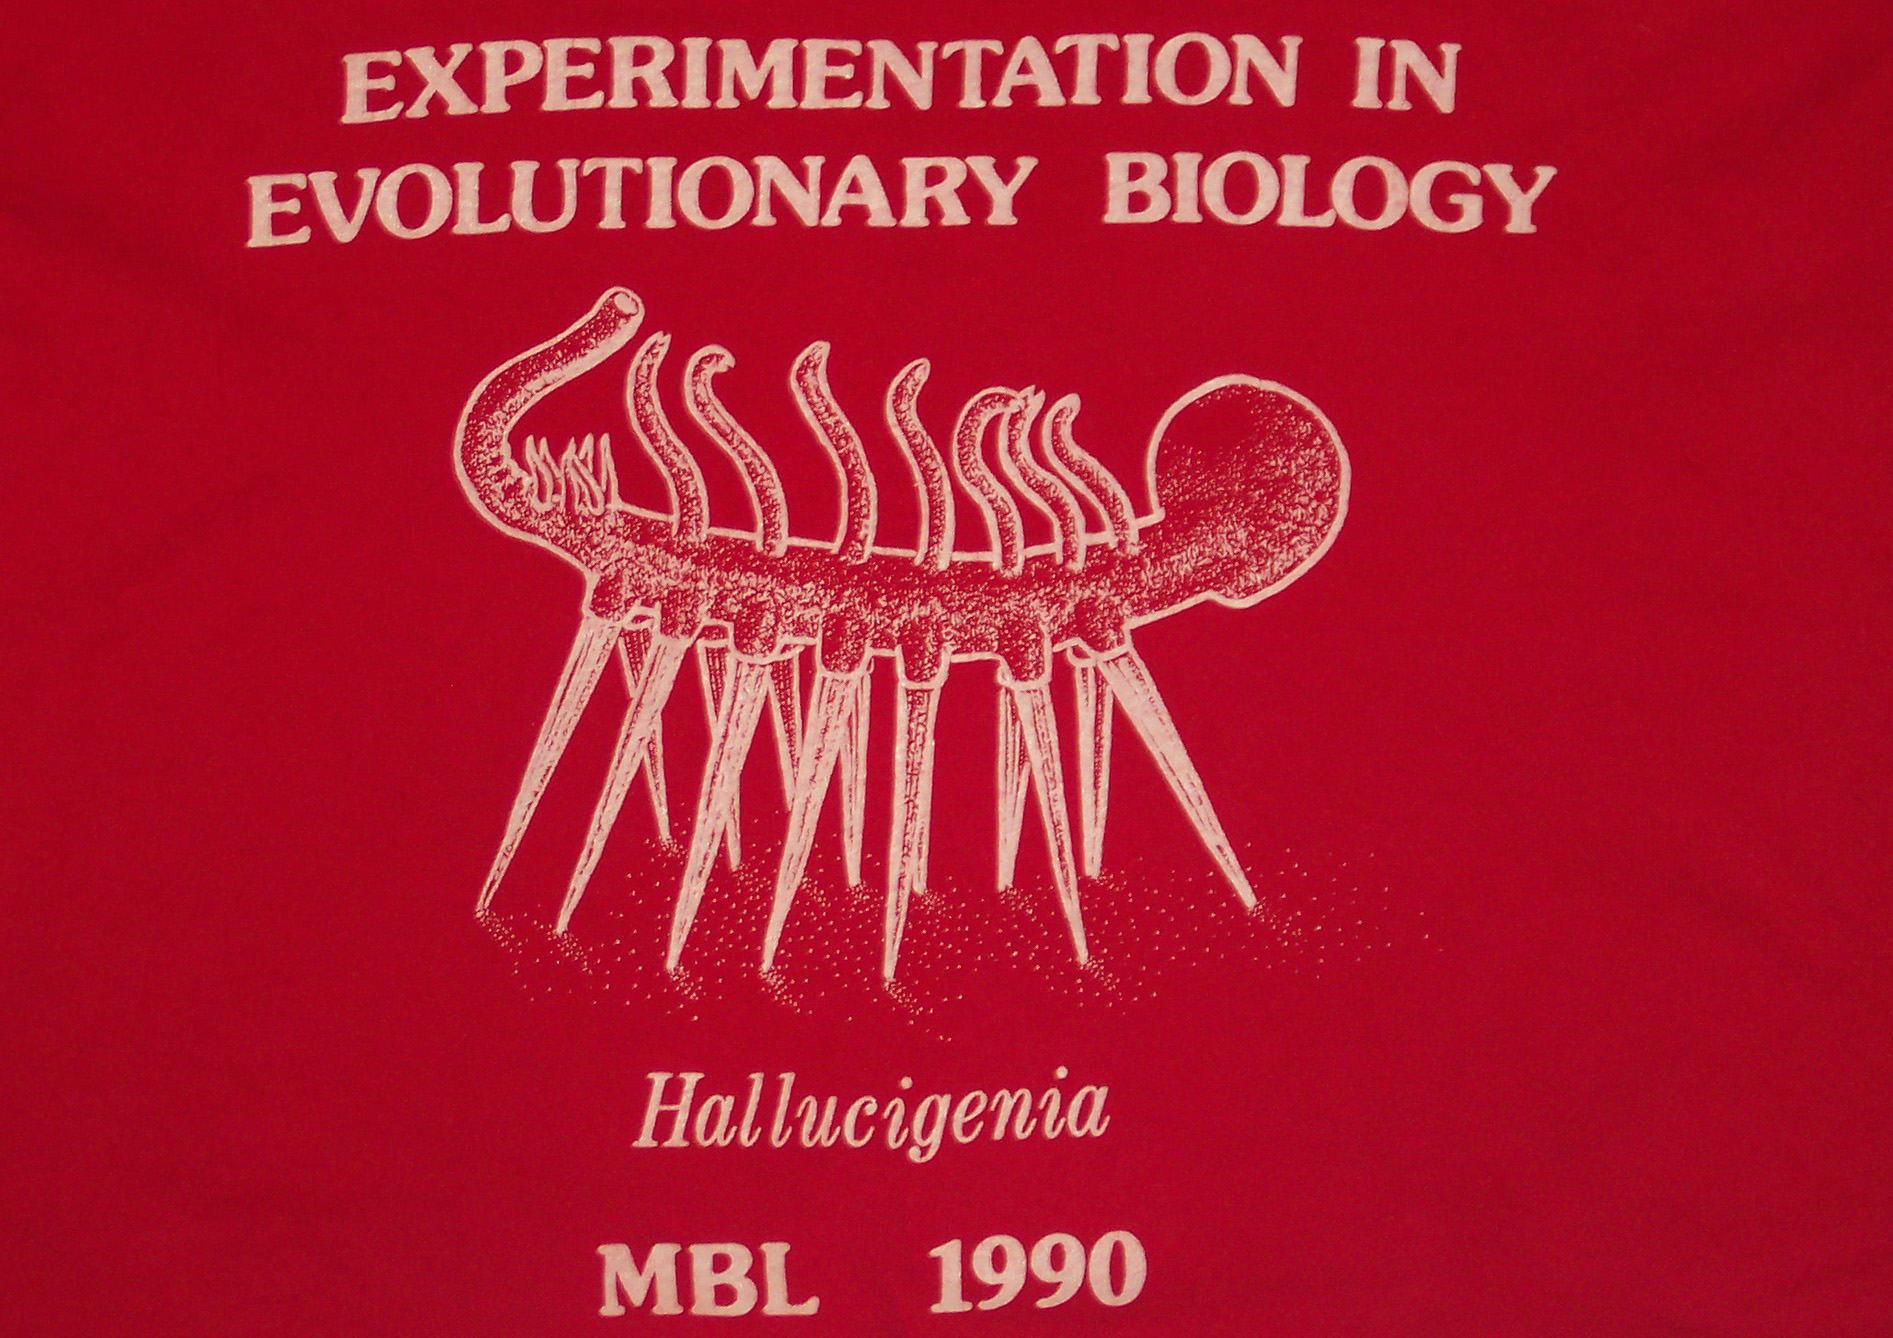 MBL TShirt (front) from 1990